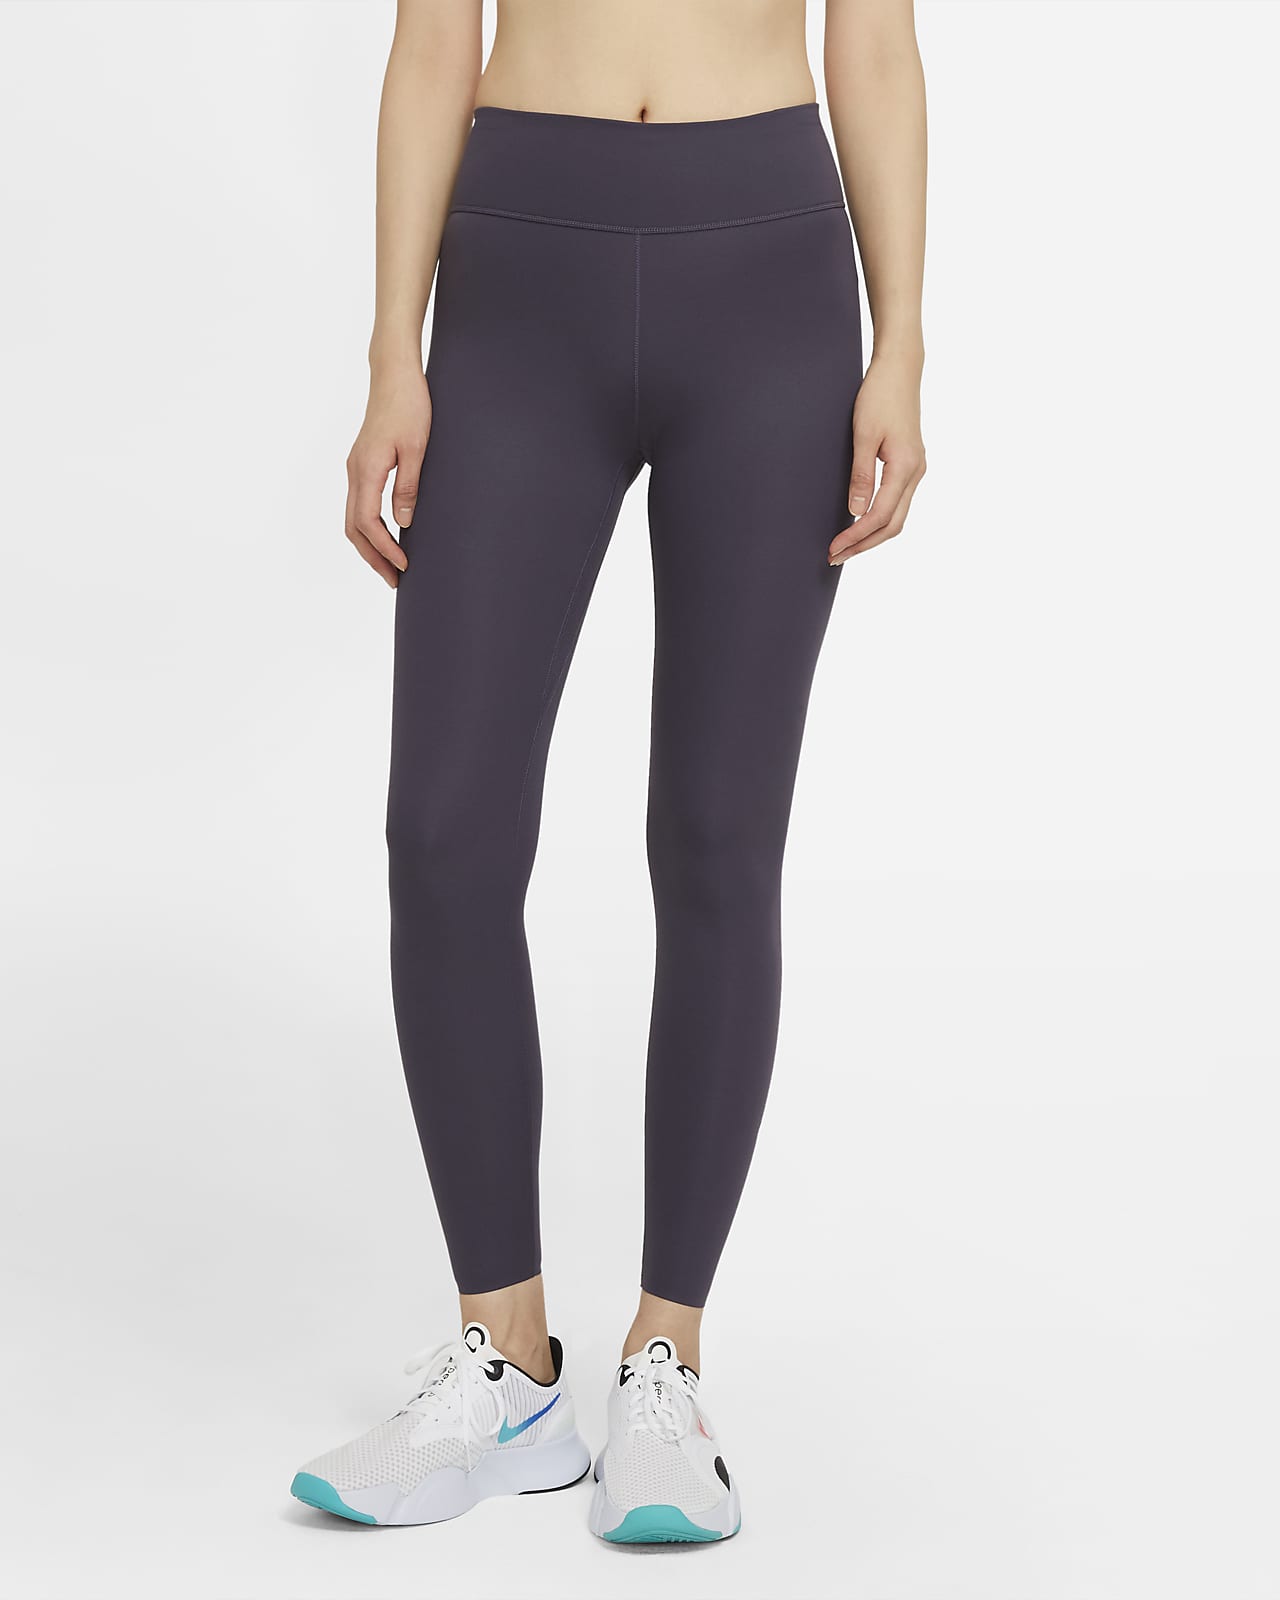 nike one luxe women's tights